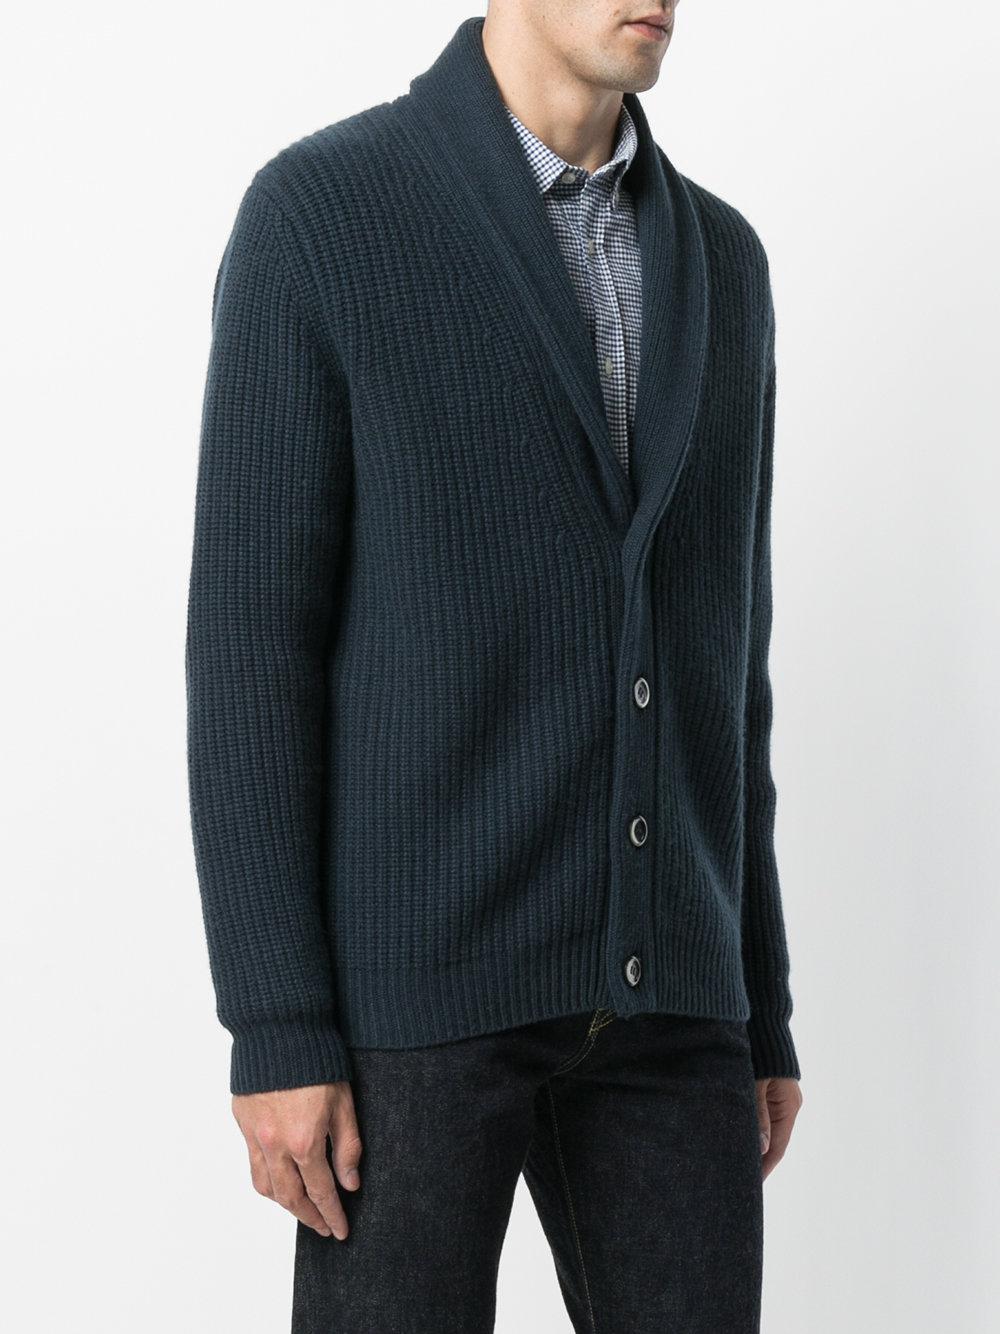 Lyst - N.Peal Cashmere Shawl Collar Cashmere Cardigan in Blue for Men